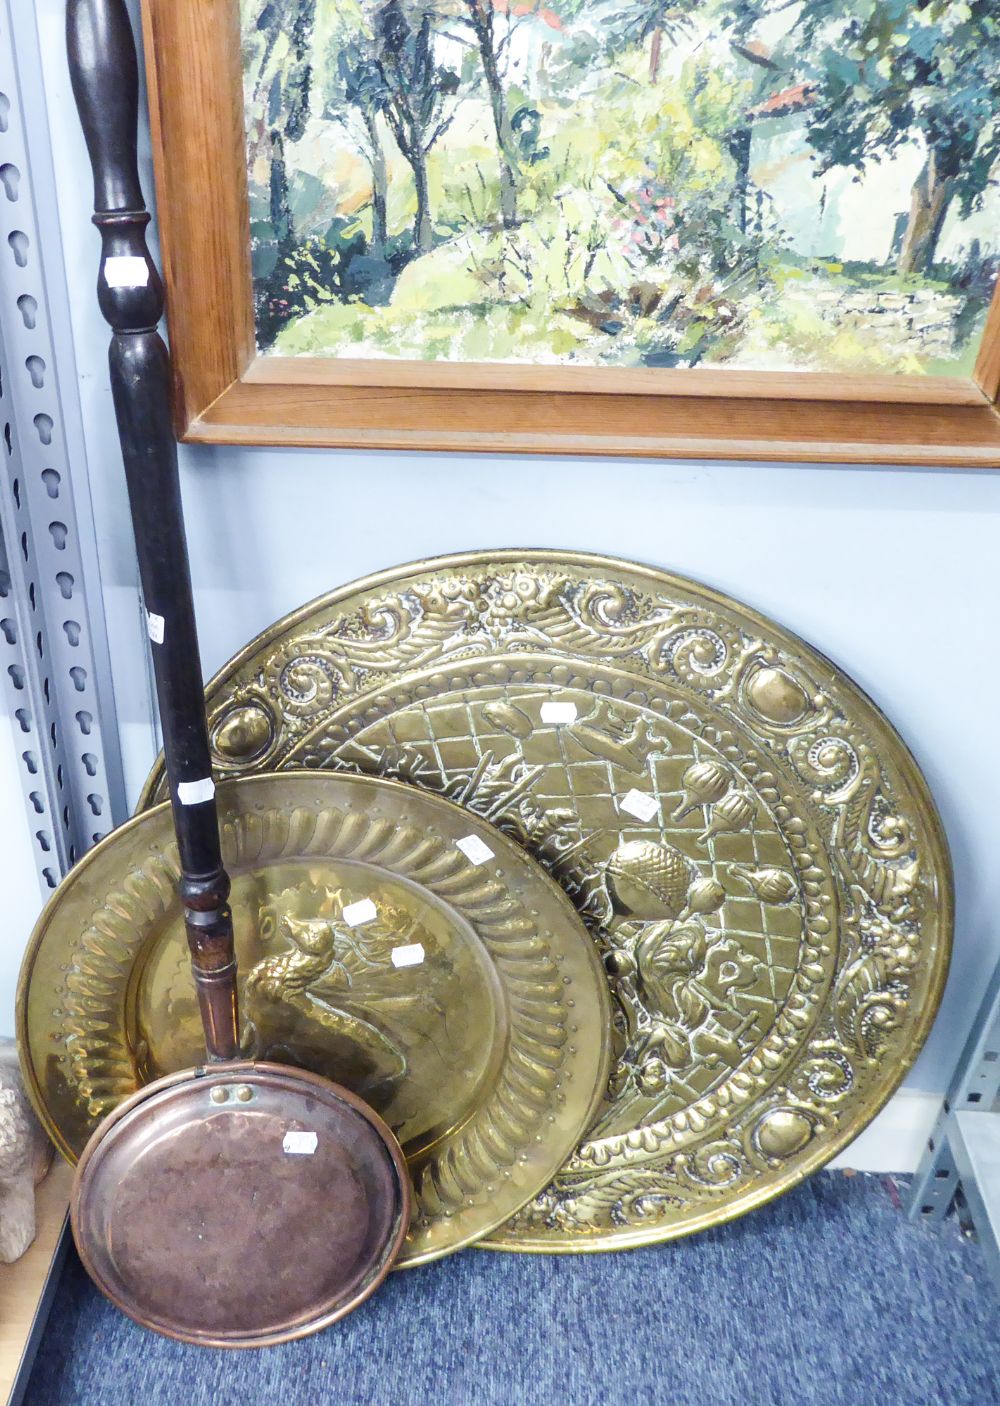 VICTORIAN COPPER BED WARMING PAN WITH TURNED WOOD HANDLE, EMBOSSED BRASS PLAQUE CENTRED WITH A - Image 2 of 2